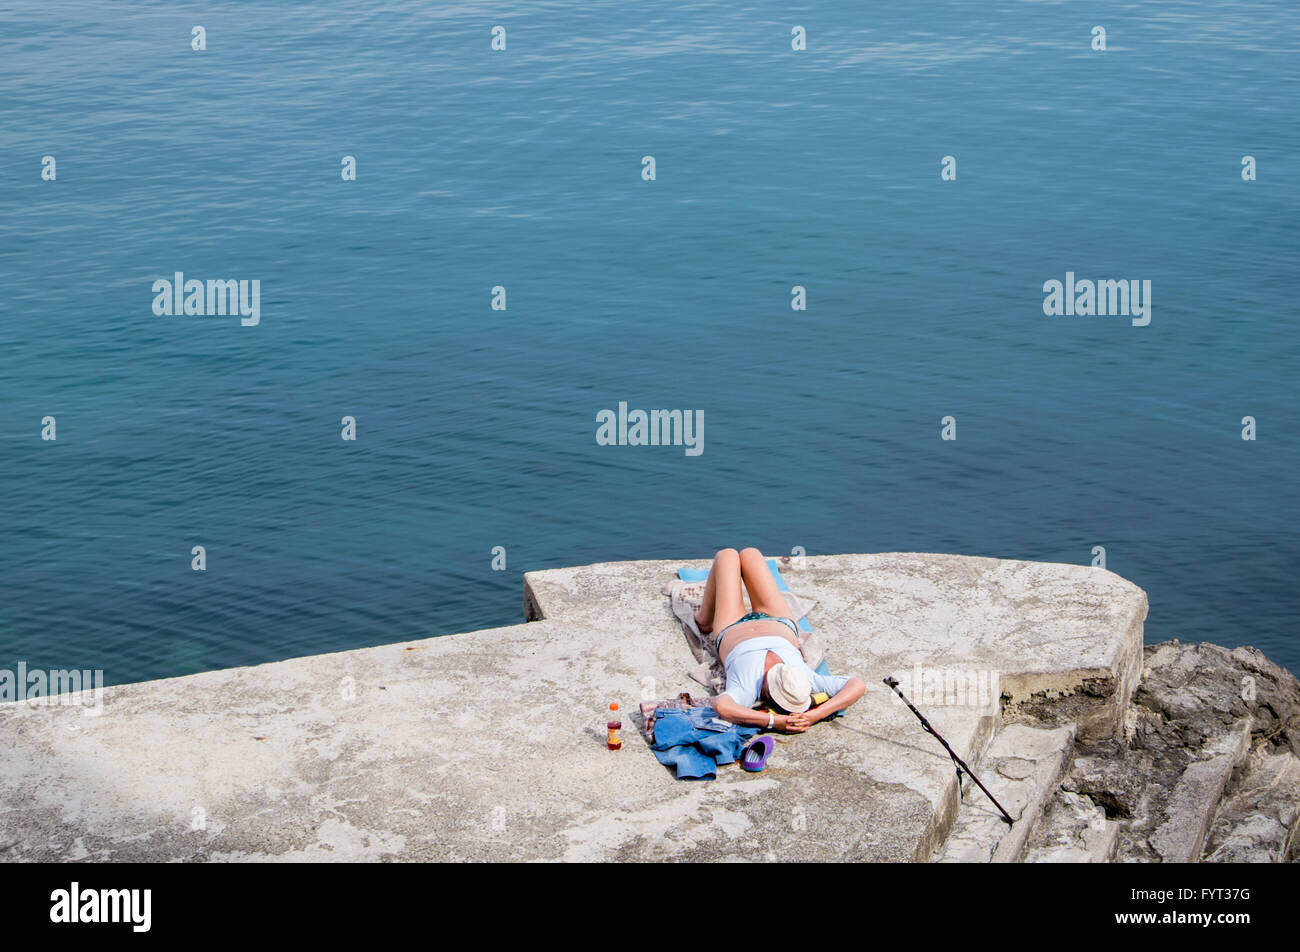 Woman sunbathing on a concrete beach by the Adriatic sea Stock Photo